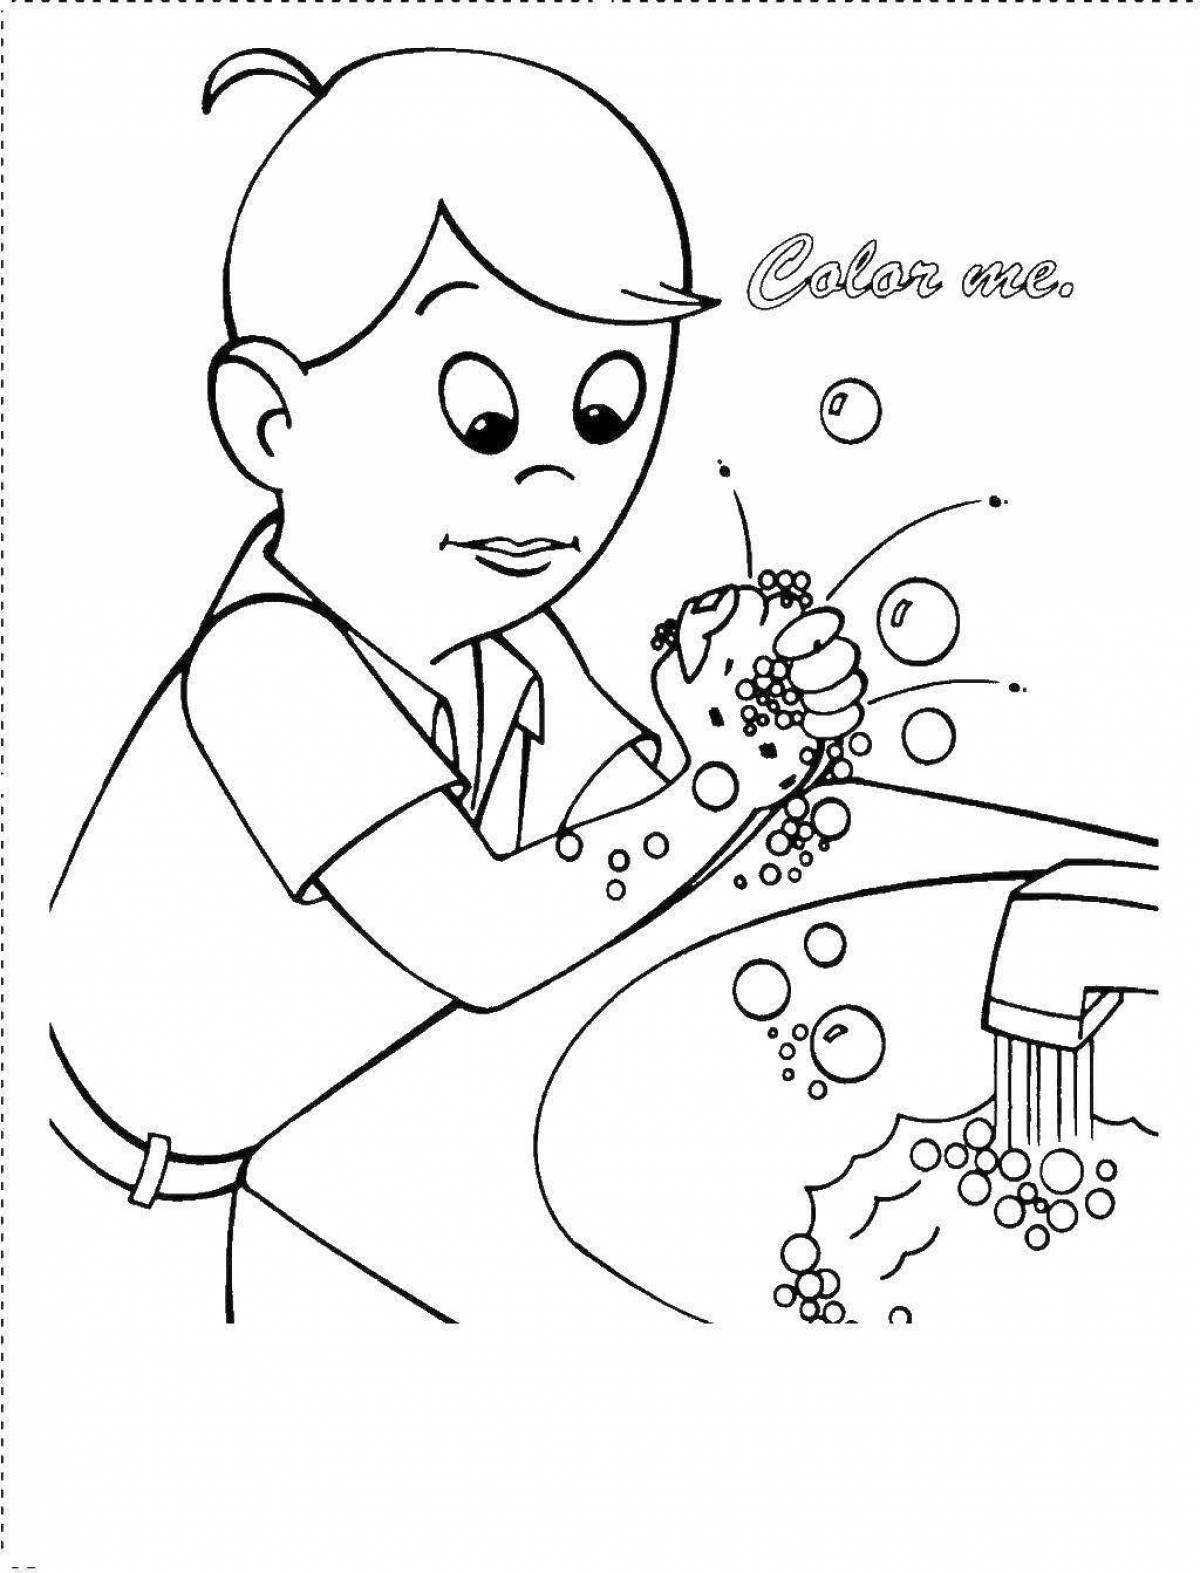 Fun flu and SARS prevention coloring book